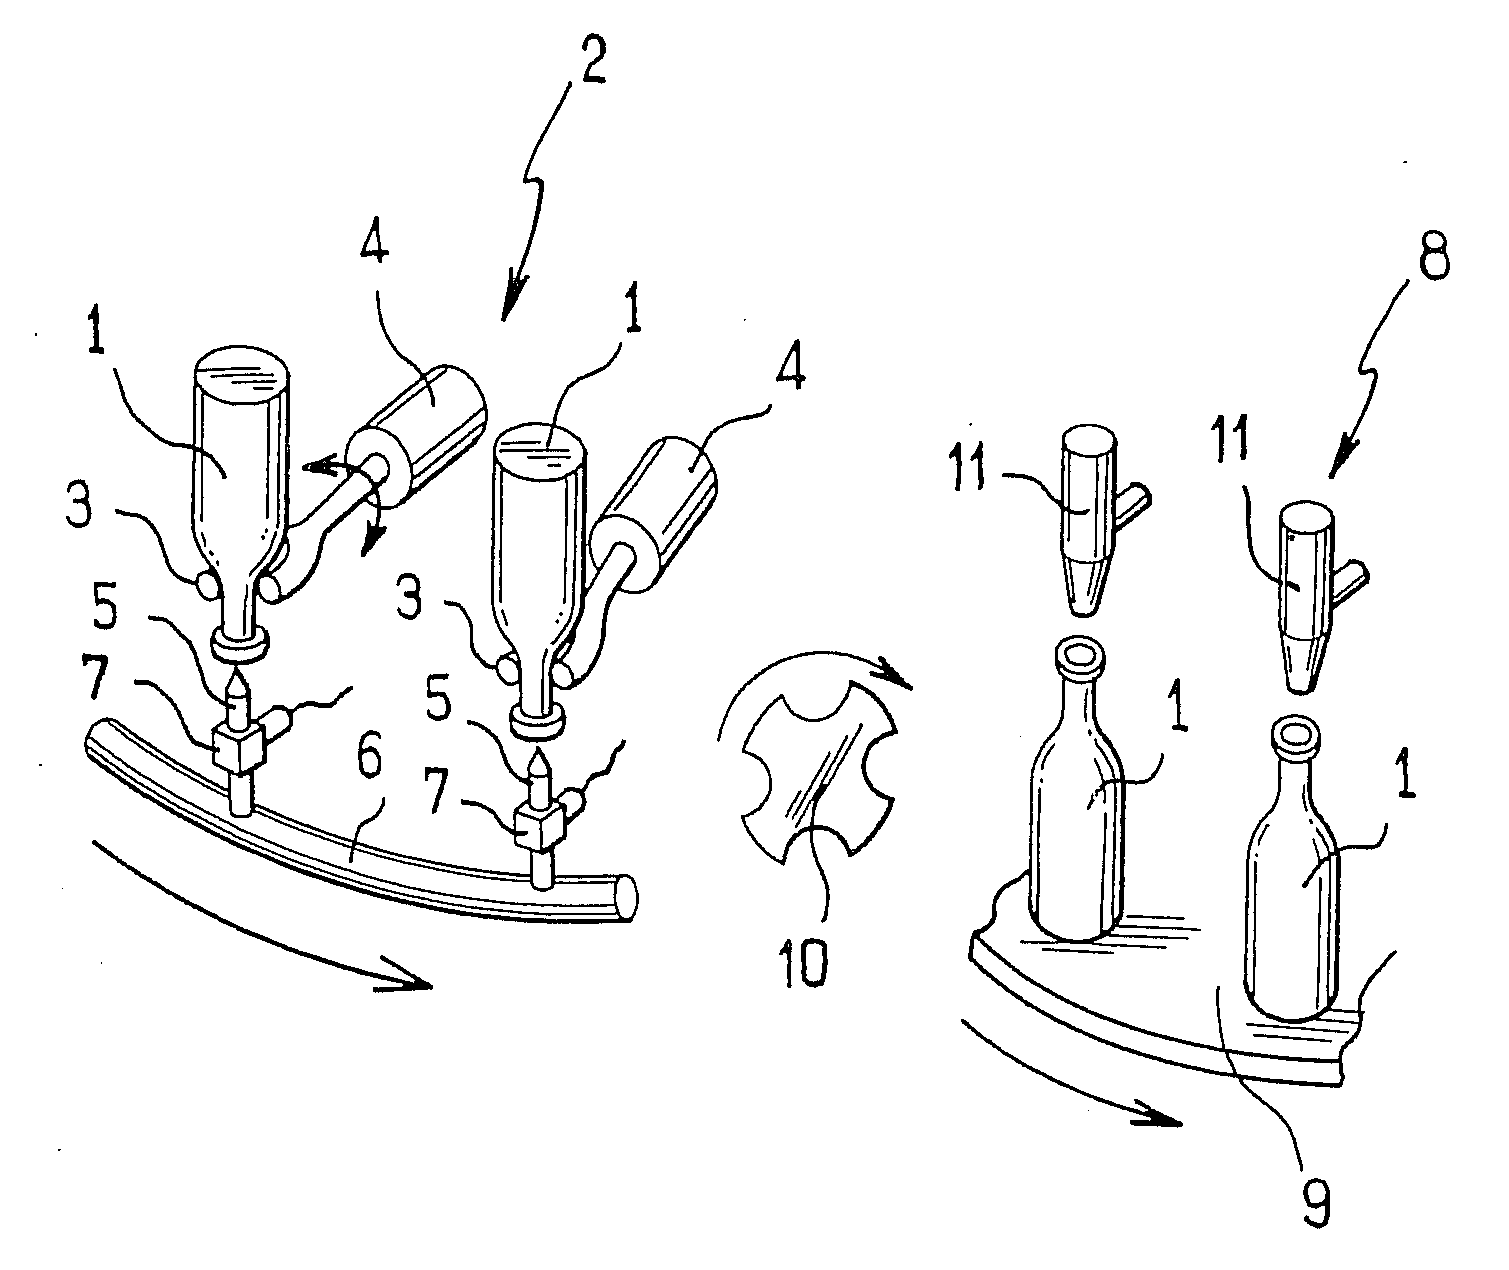 Method of disinfecting containers with a disinfectant and prior heat treatment, and a corresponding installation